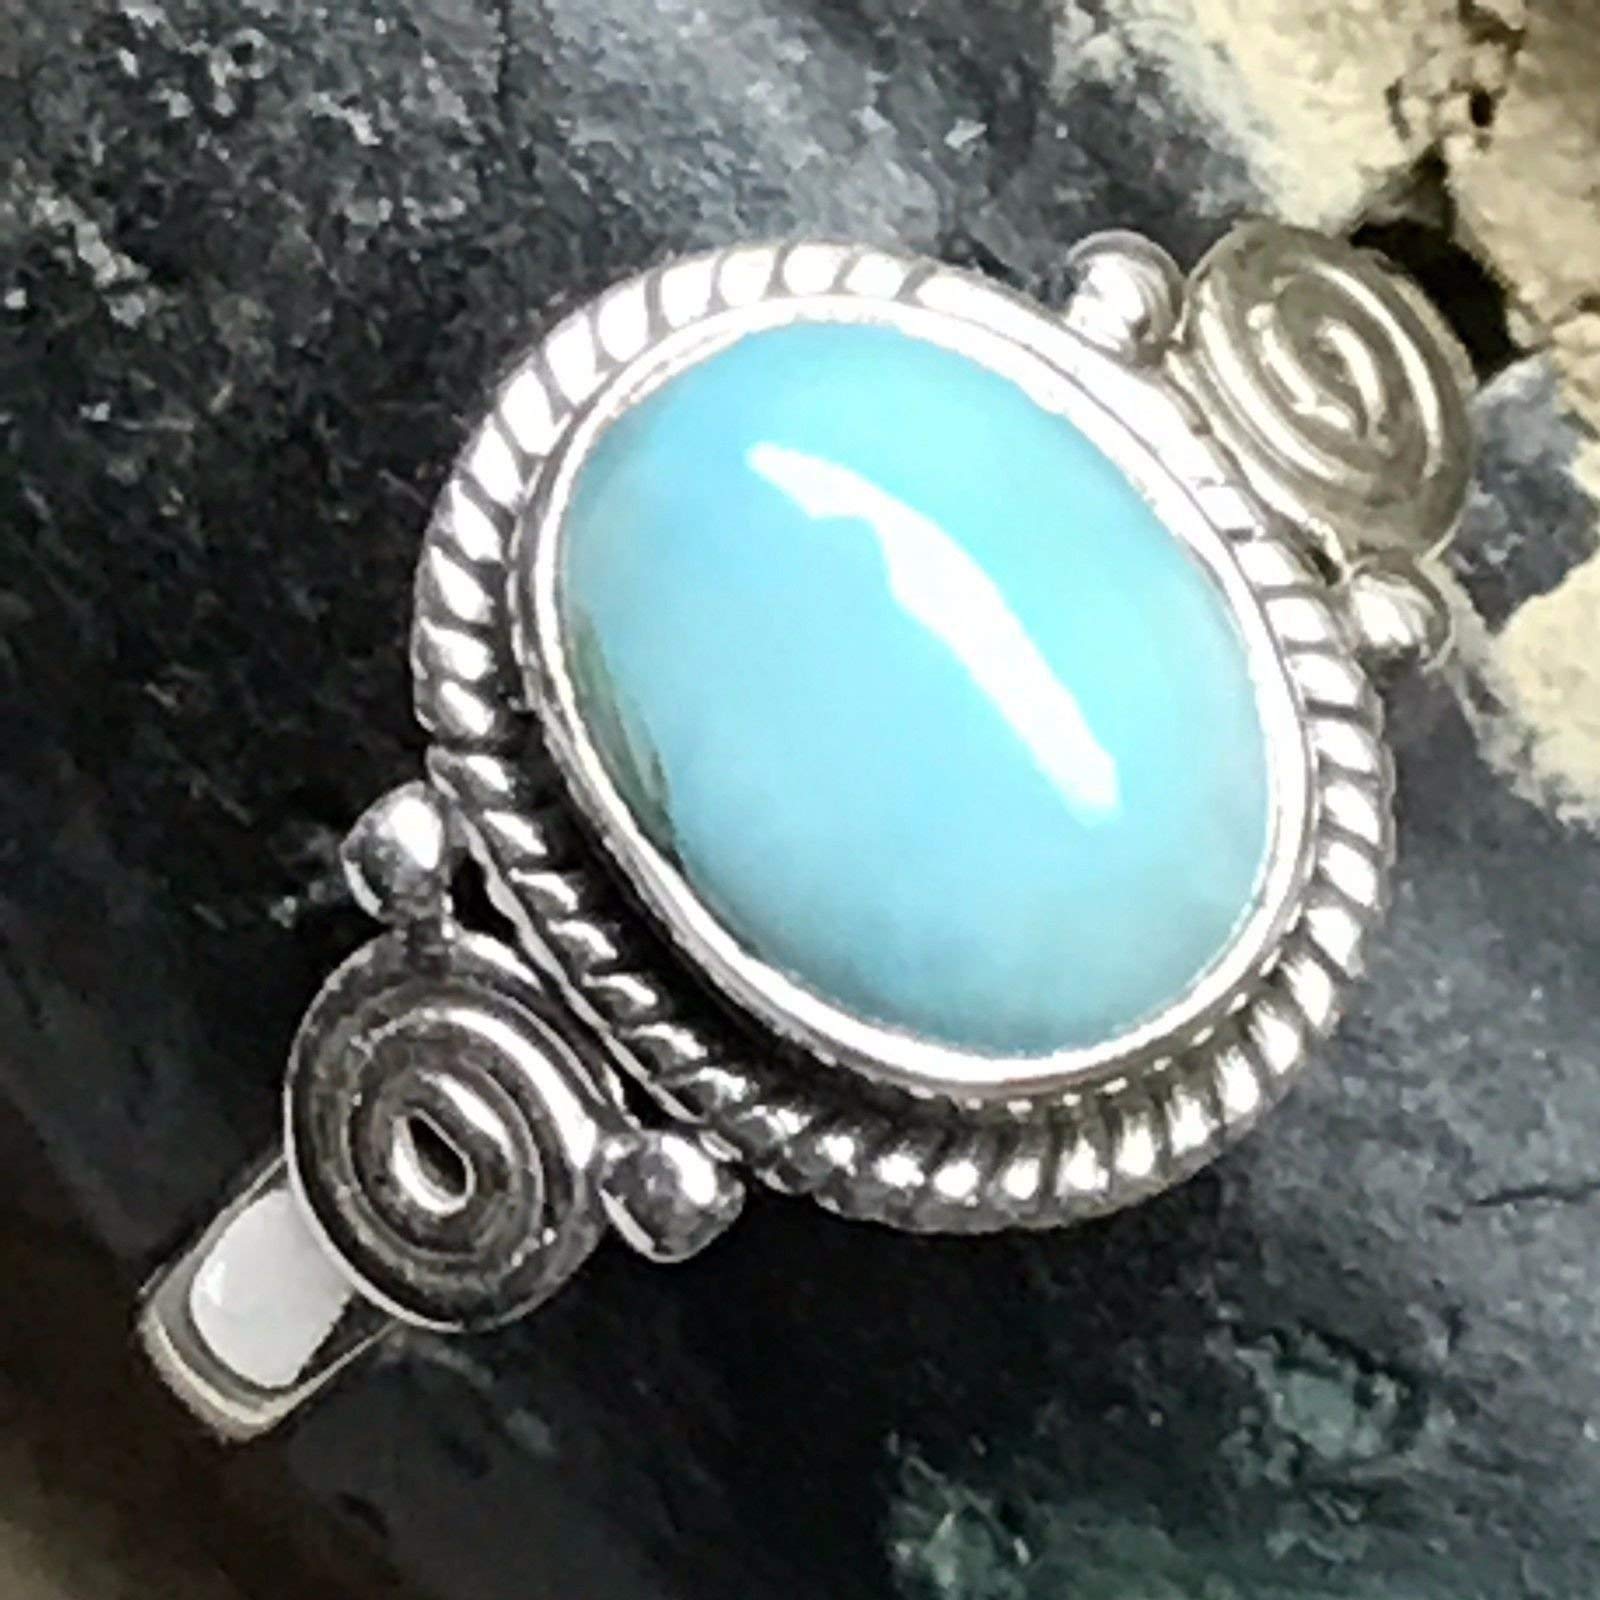 Genuine Dominican Larimar 925 Sterling Silver Engagement Ring Size 7, 9 - Natural Rocks by Kala